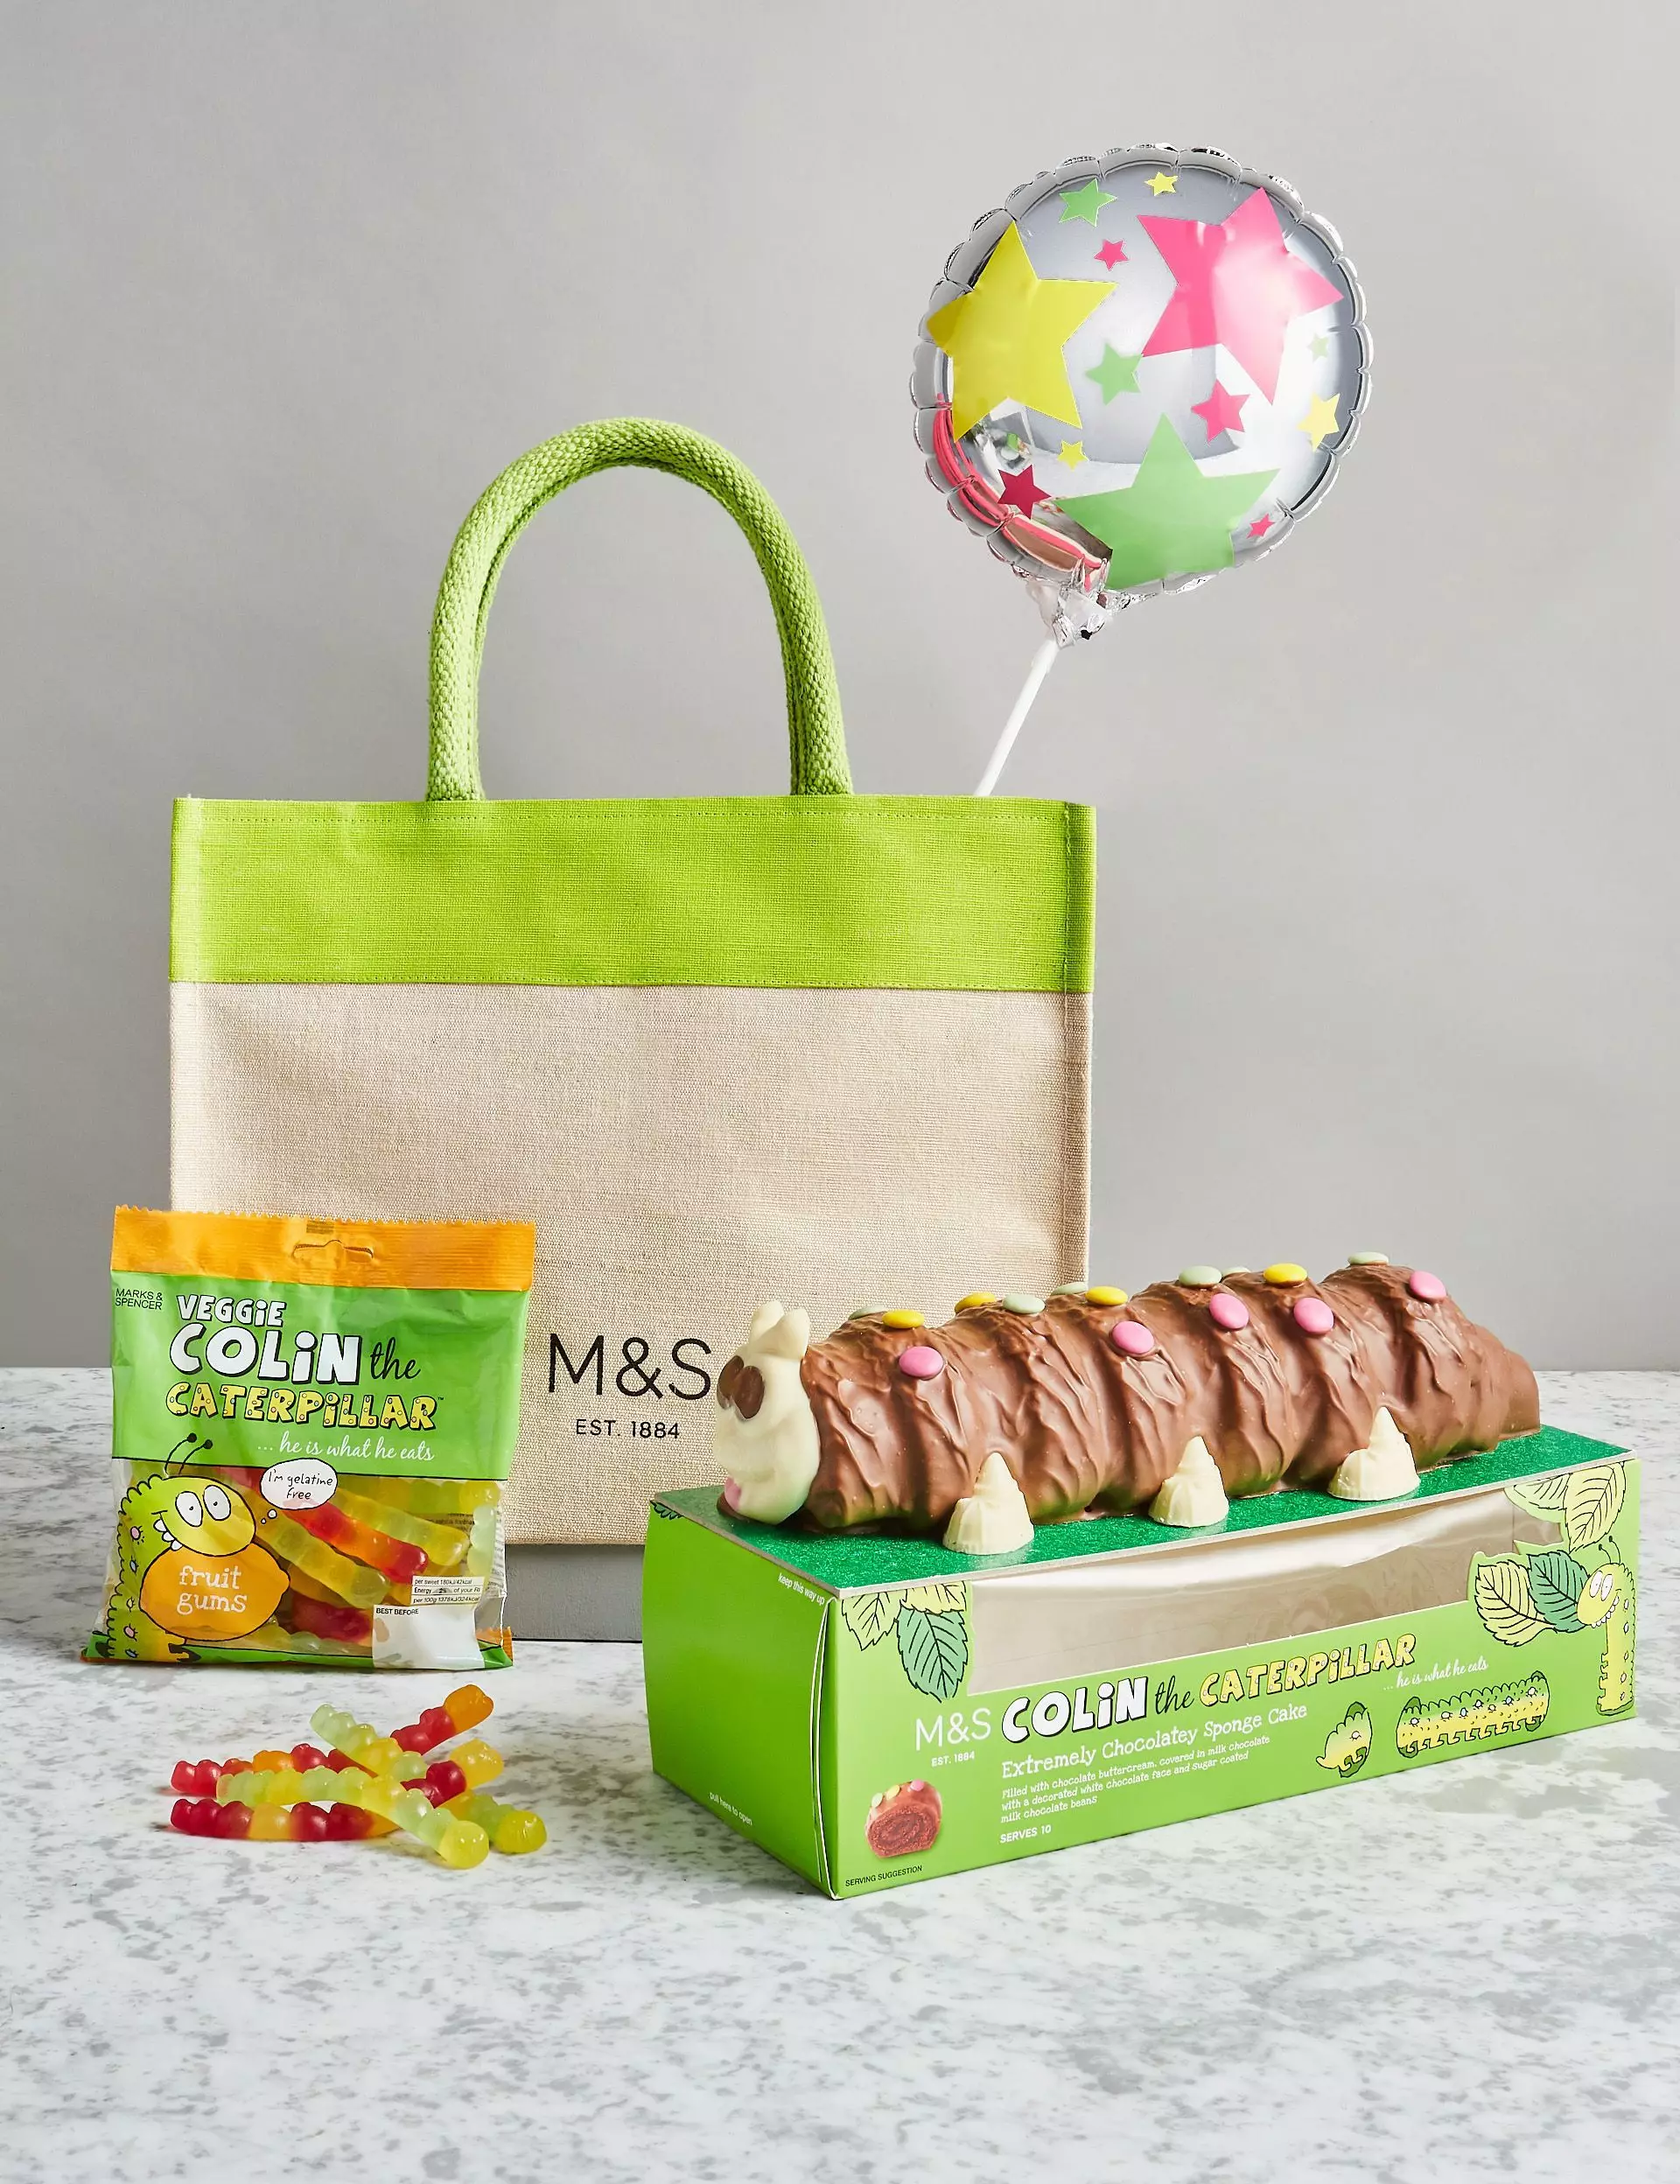 The Colin birthday hamper costs £20 and includes a Colin cake, veggie Colin the Caterpillar sweets and a star-patterned foil balloon (